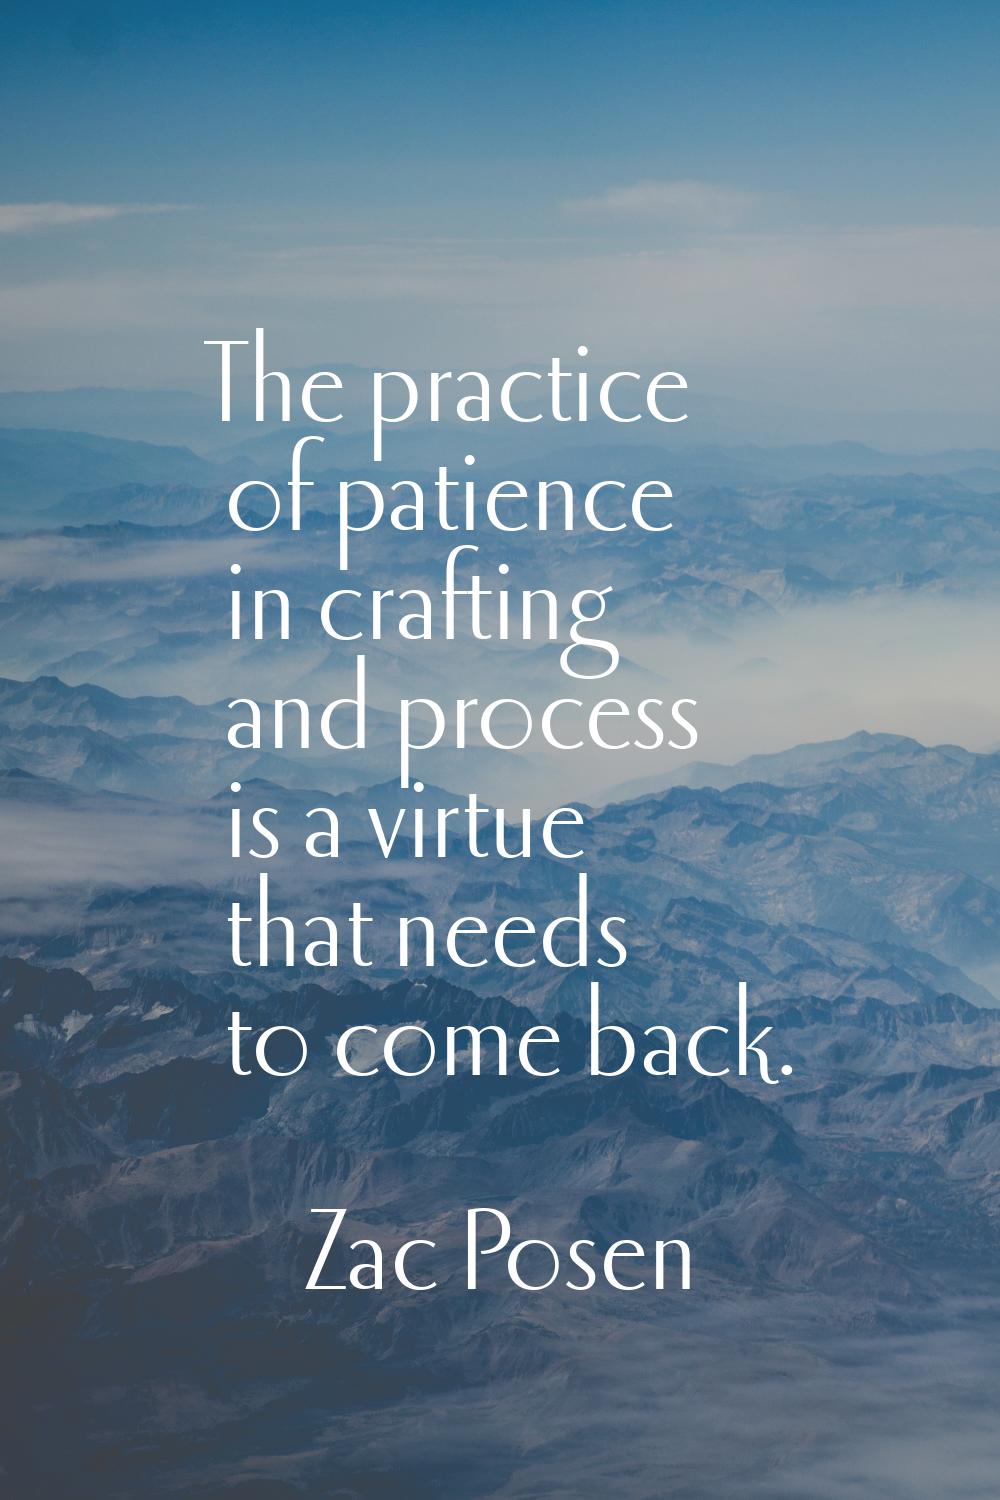 The practice of patience in crafting and process is a virtue that needs to come back.